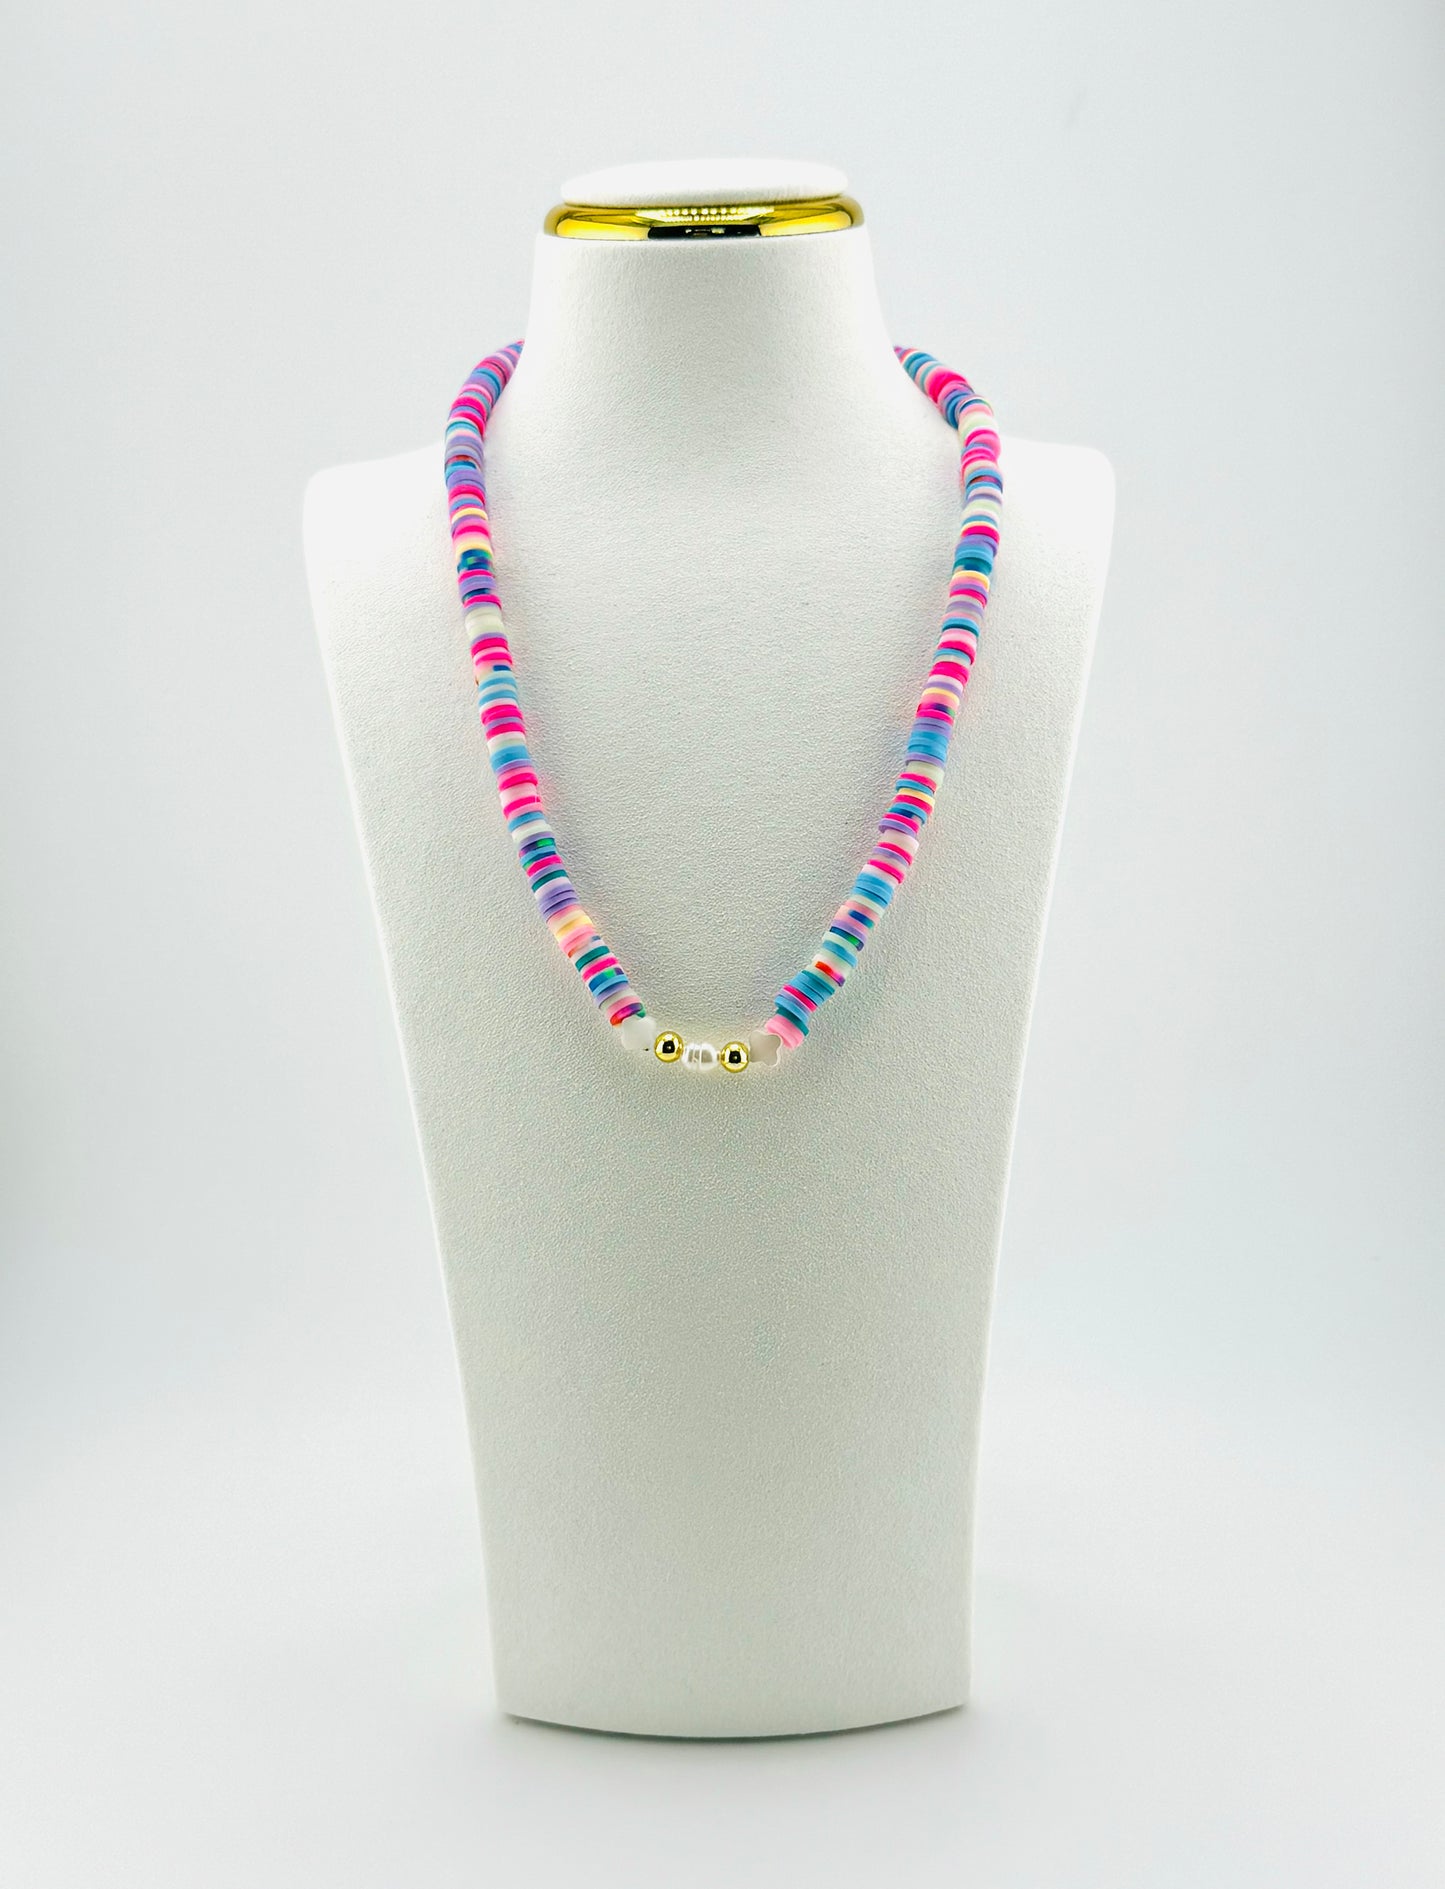 Harper fresh water pearls necklace and blue clay beads